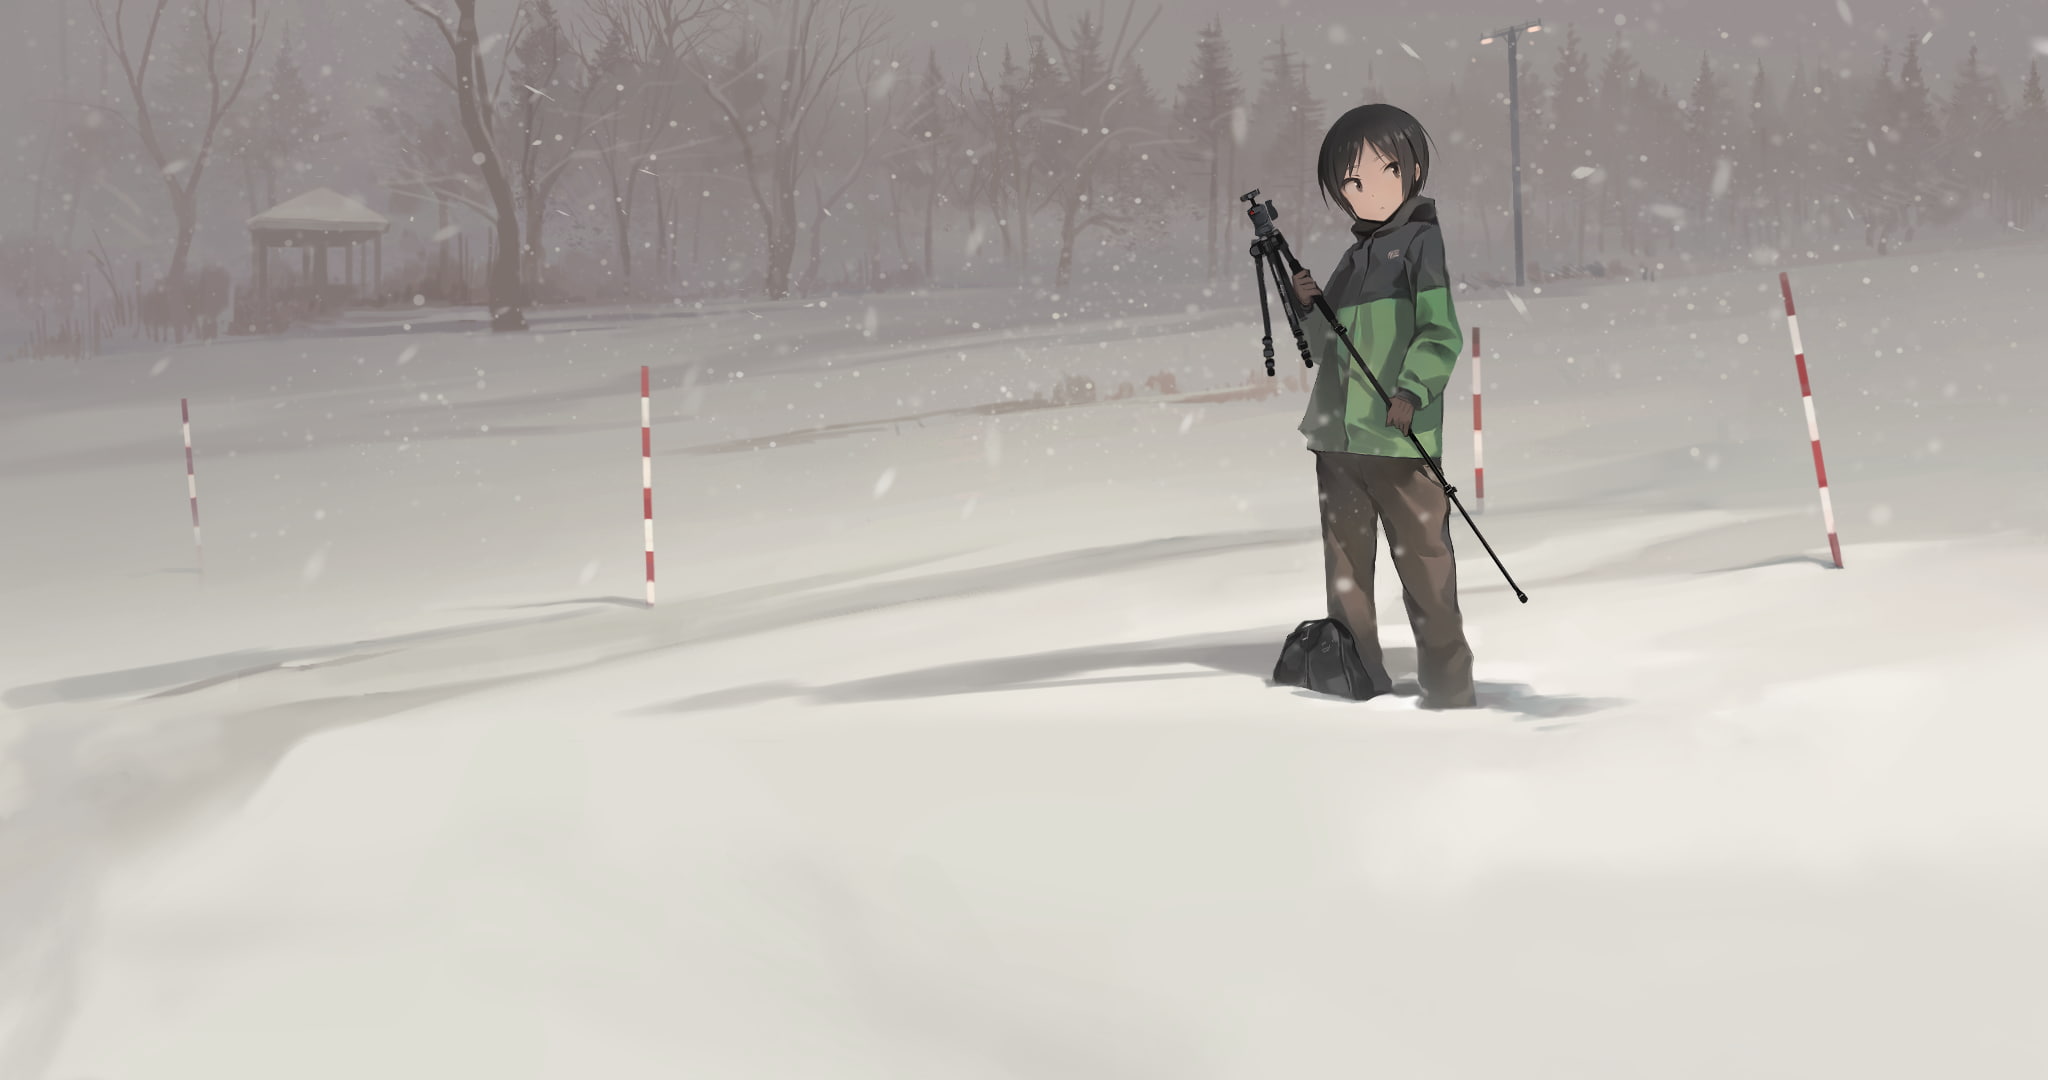 snow, jacket, trees, original characters, anime, winter, cold temperature